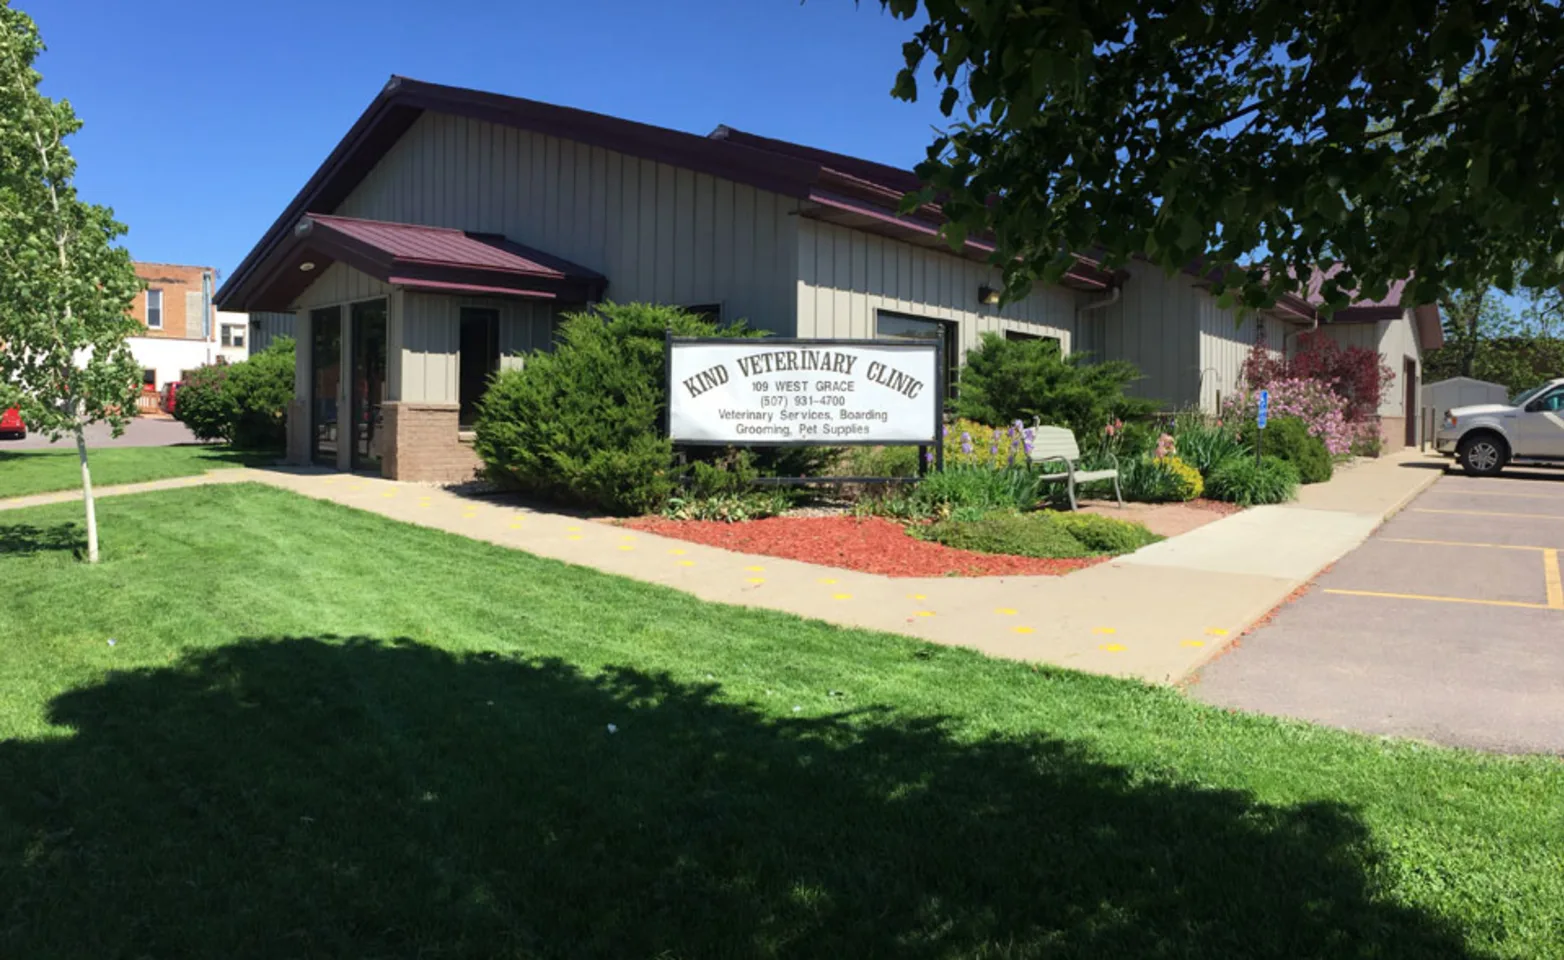 Exterior of Kind Veterinary Clinic with sign in St. Peter, MN.